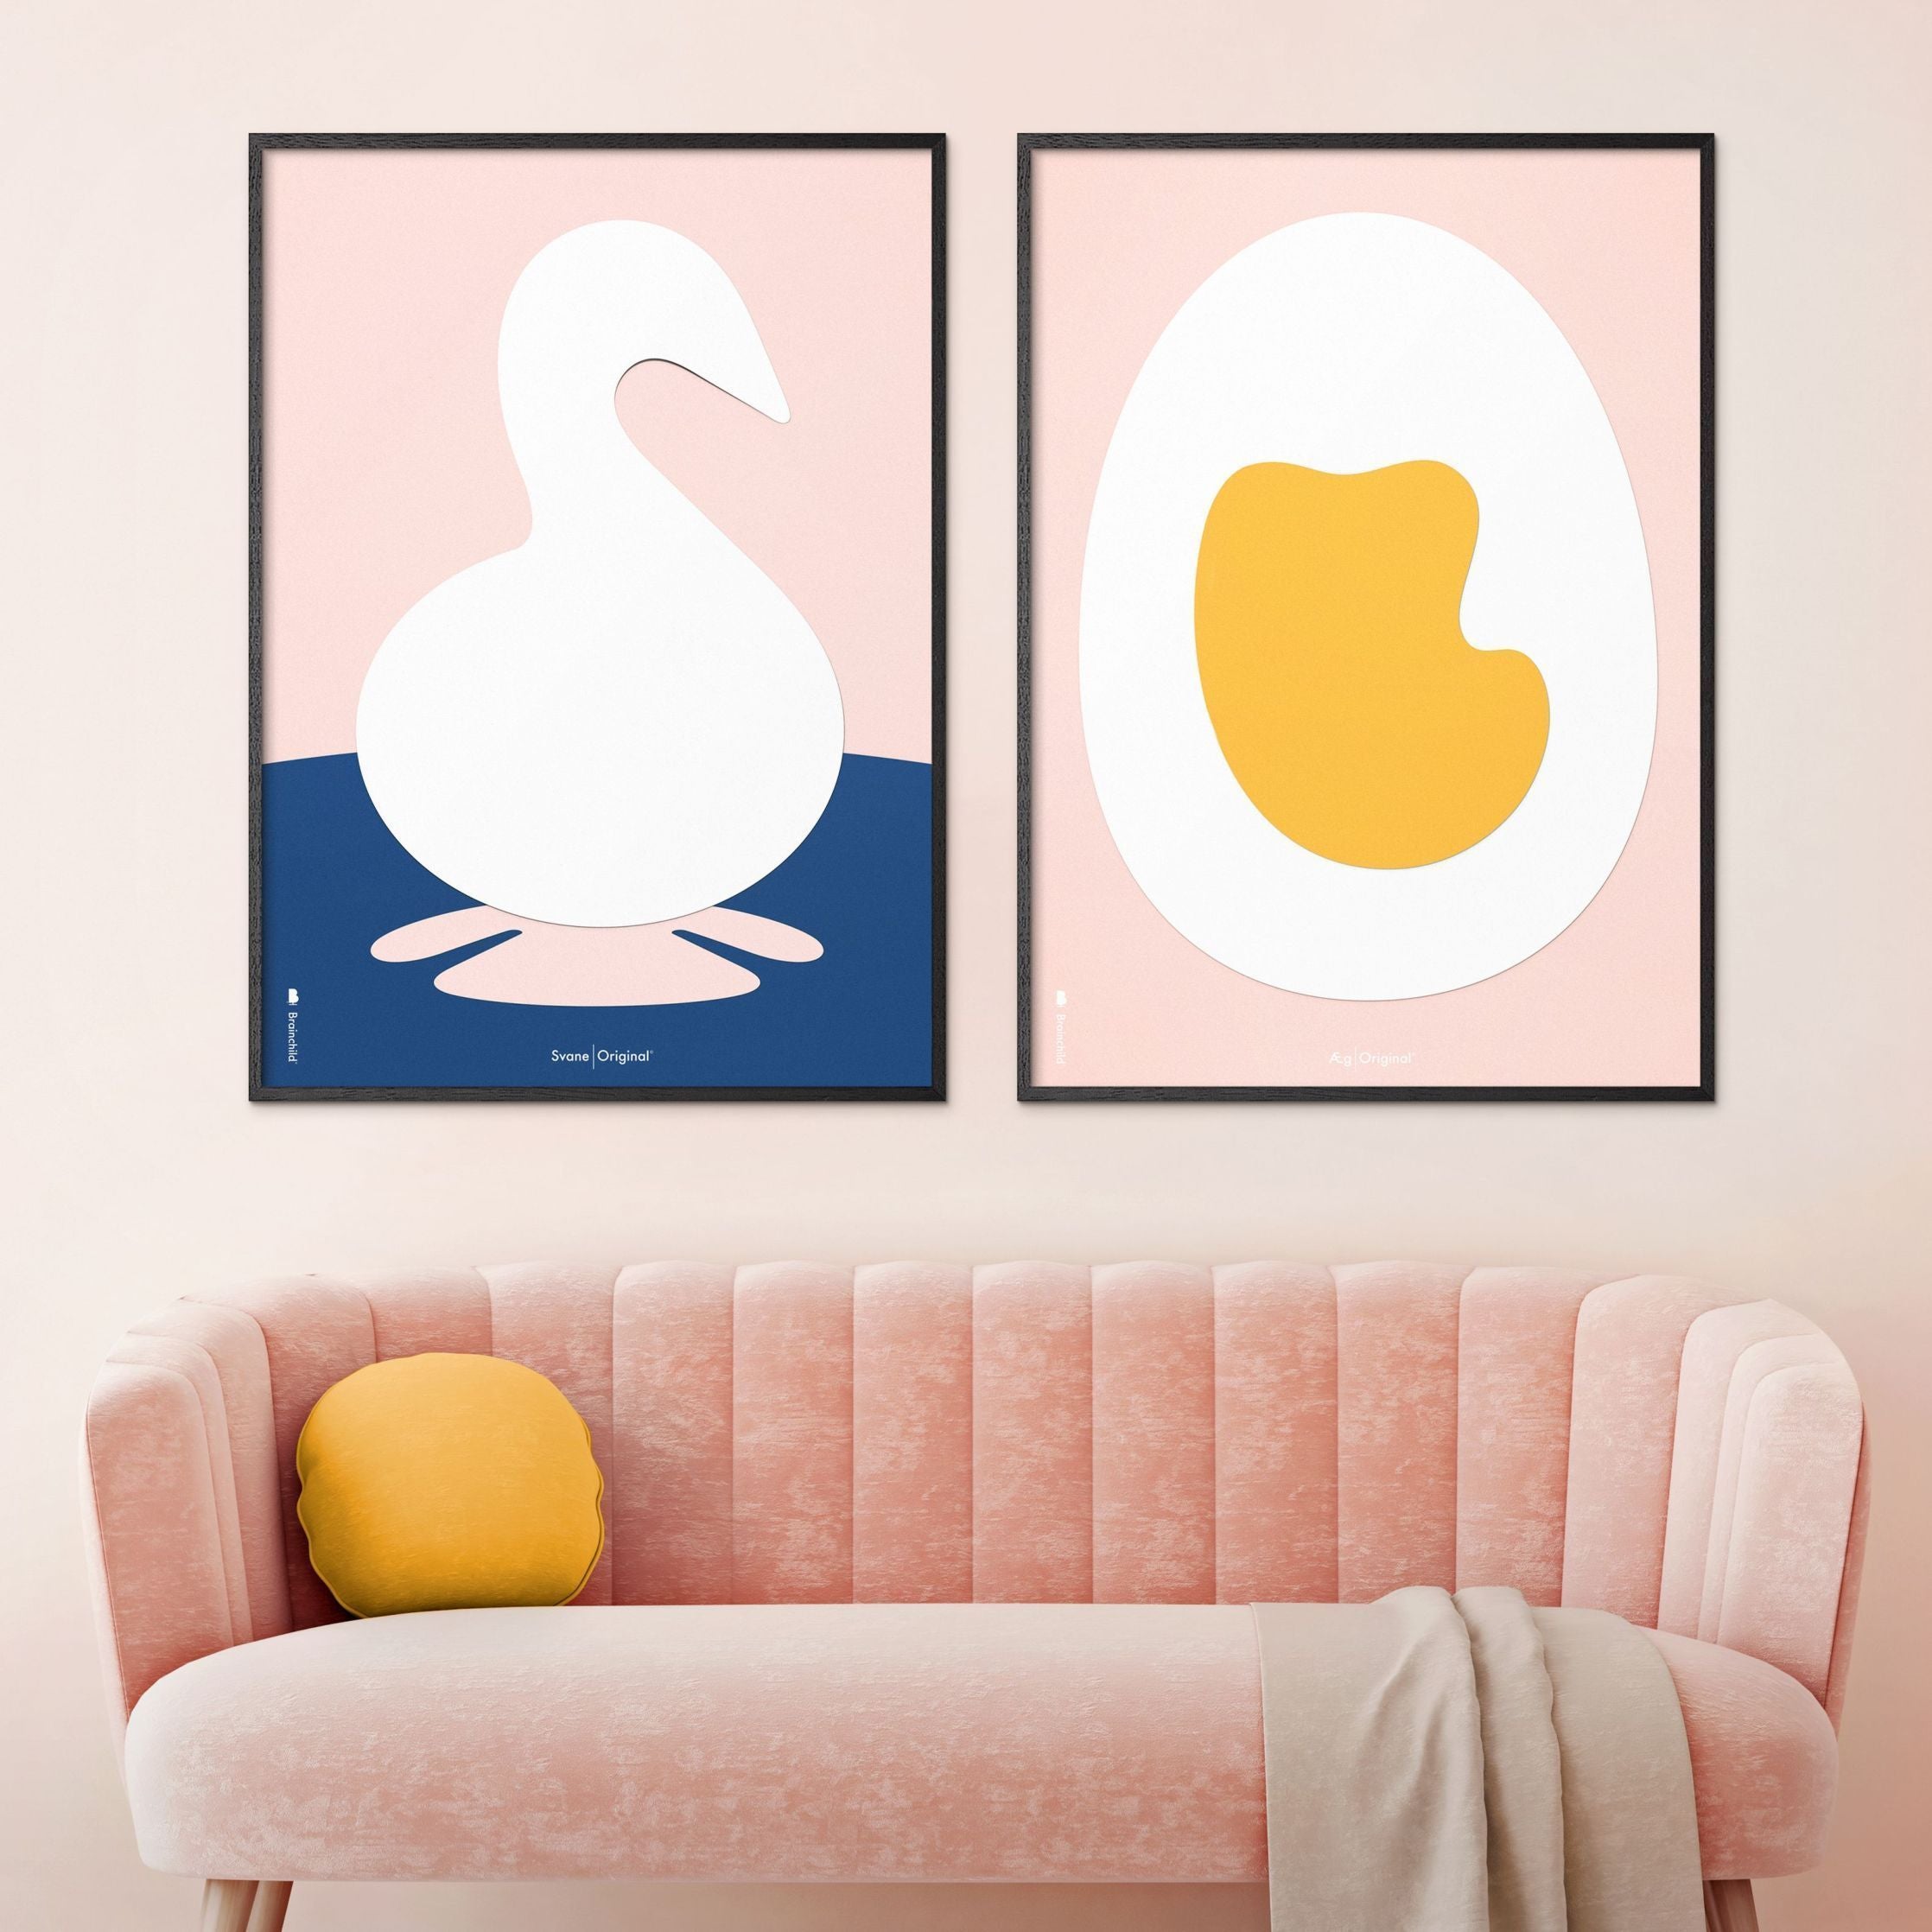 Brainchild Swan Paper Clip Poster, Frame Made Of Light Wood 30x40 Cm, Pink Background